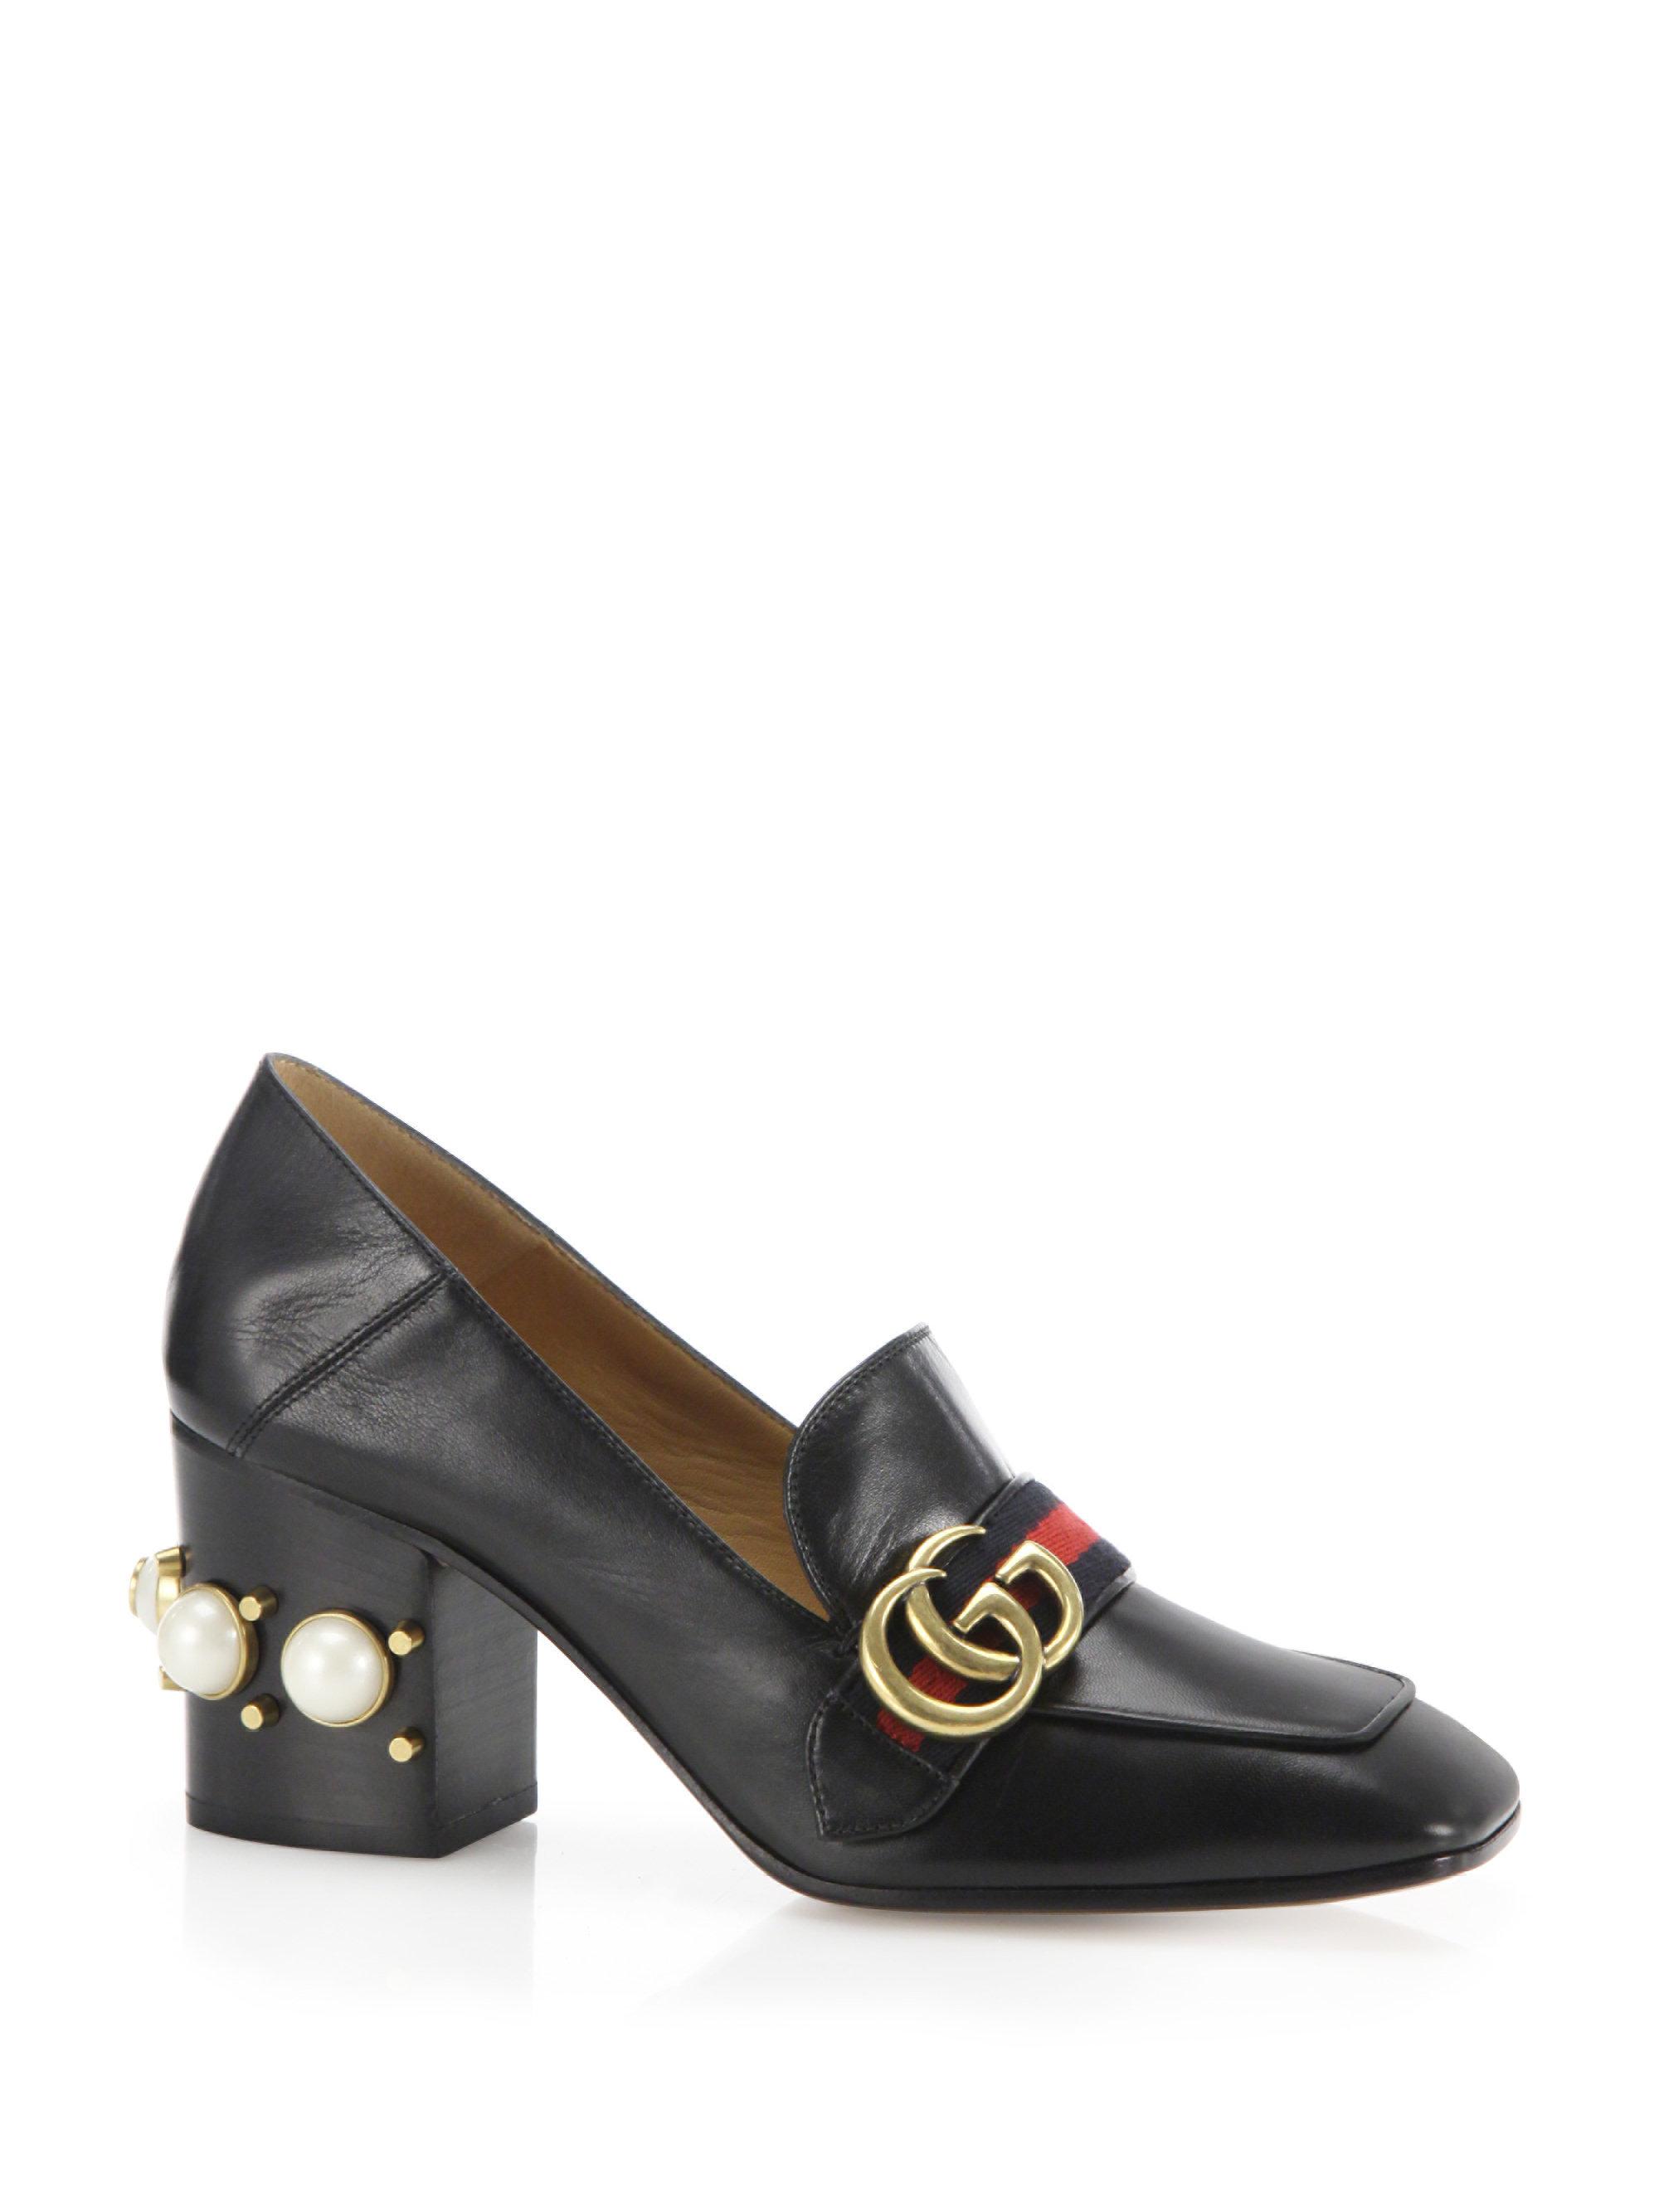 Gucci Black Pearl Heel 80 Leather Pumps - Lyst